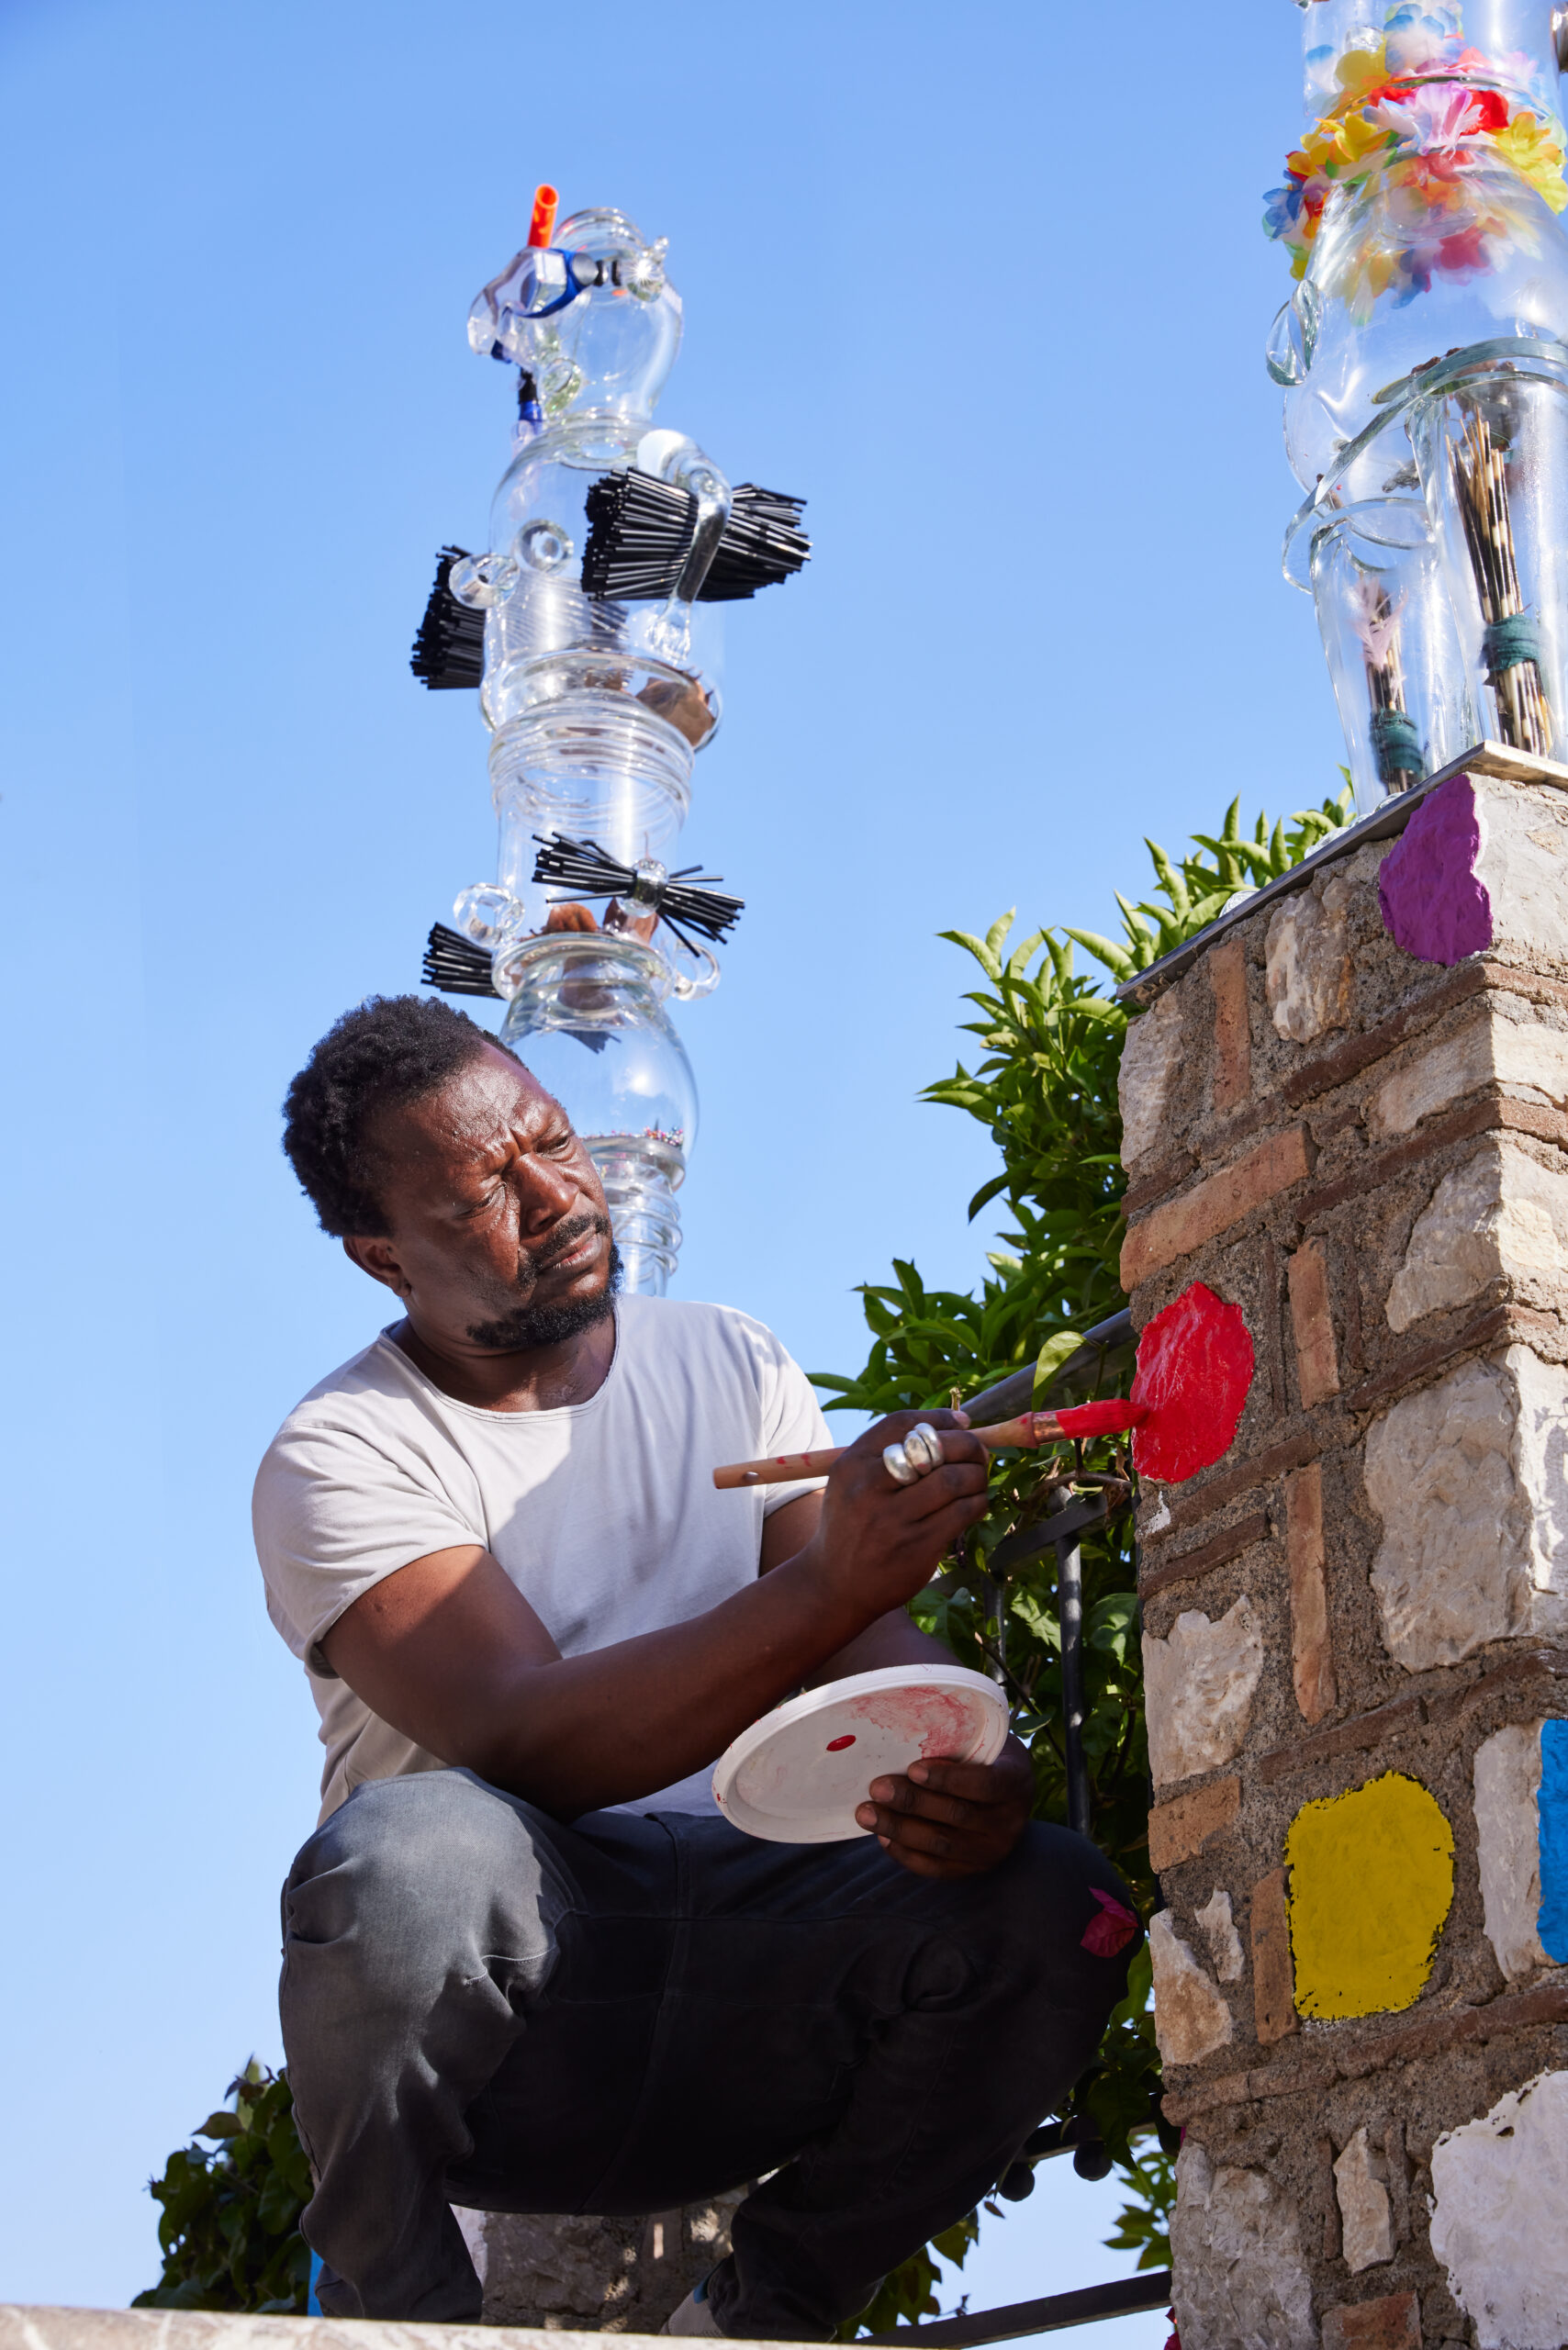 Cameroonian artist Pascal Marthine Tayou's garden installation at the Grand Hotel Timeo in Sicily (Photo Credit: Belmond)